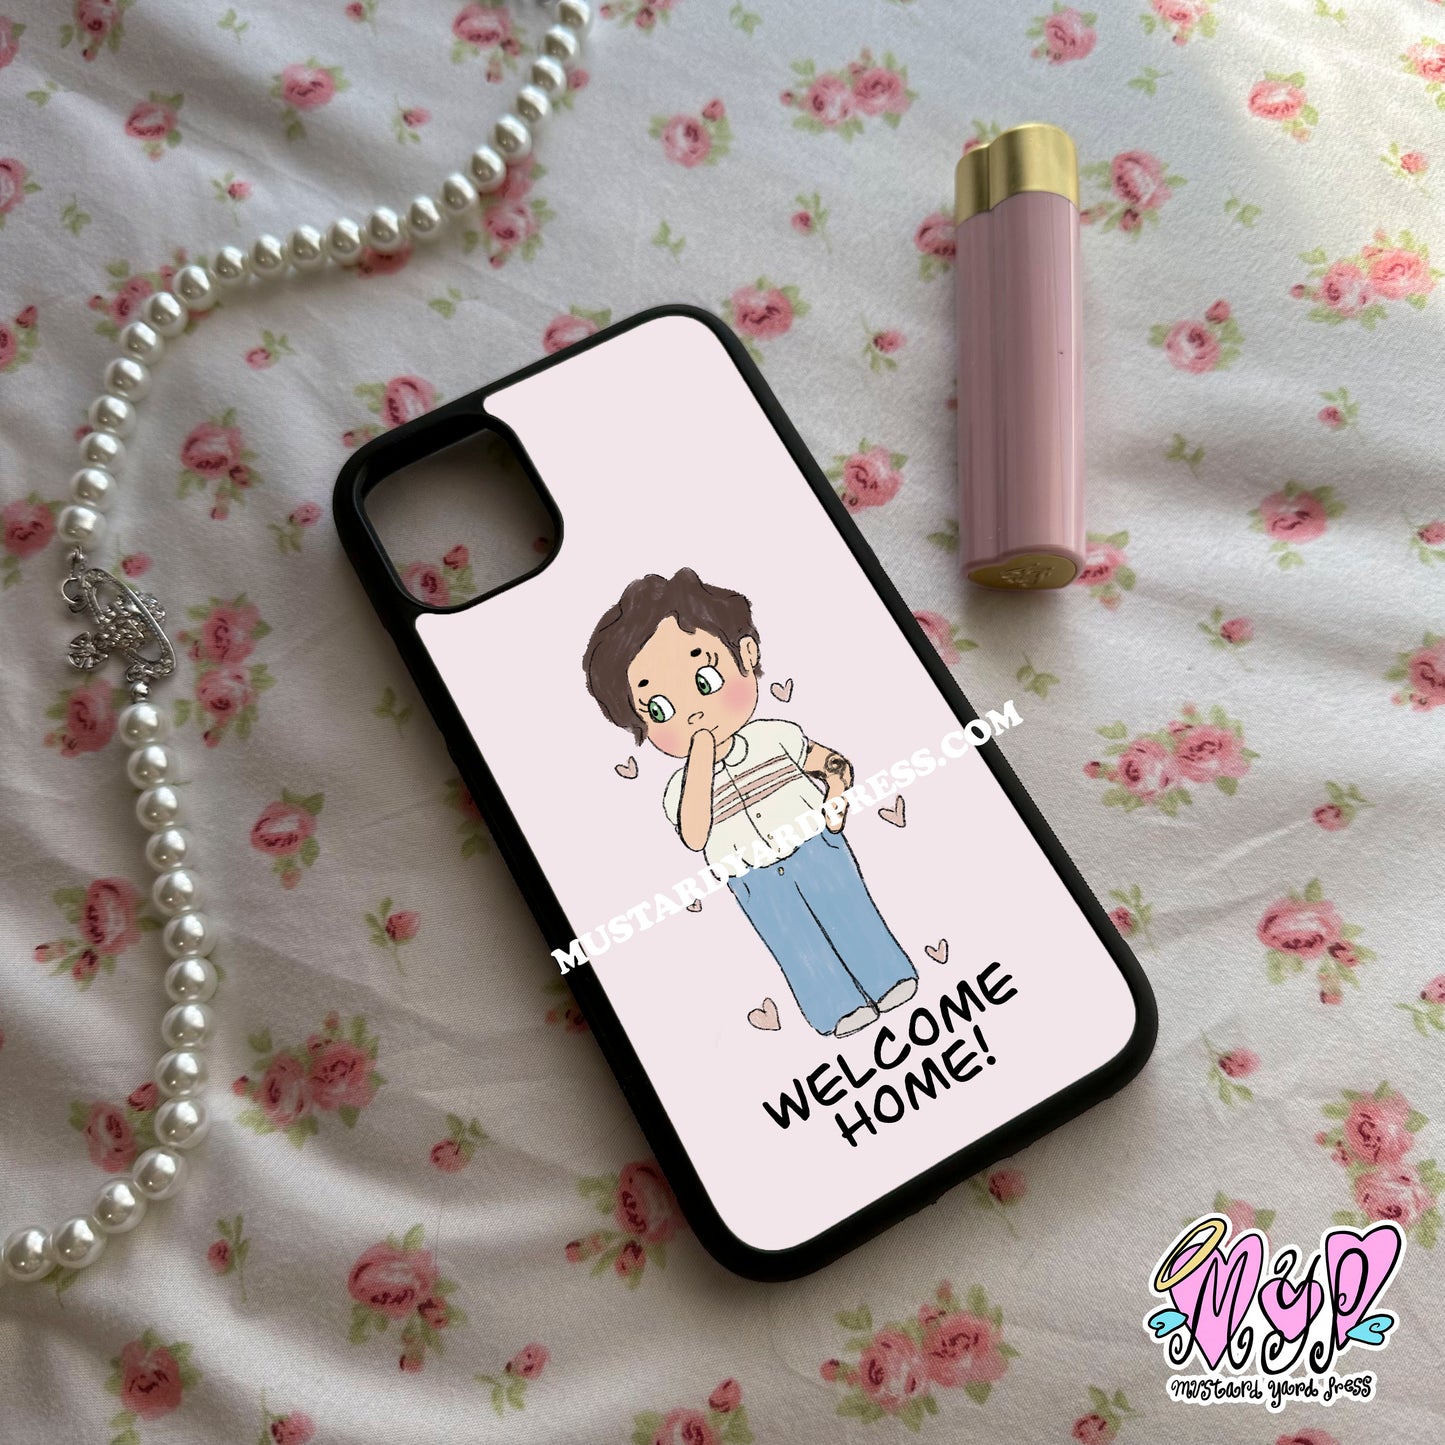 welcome home phone case